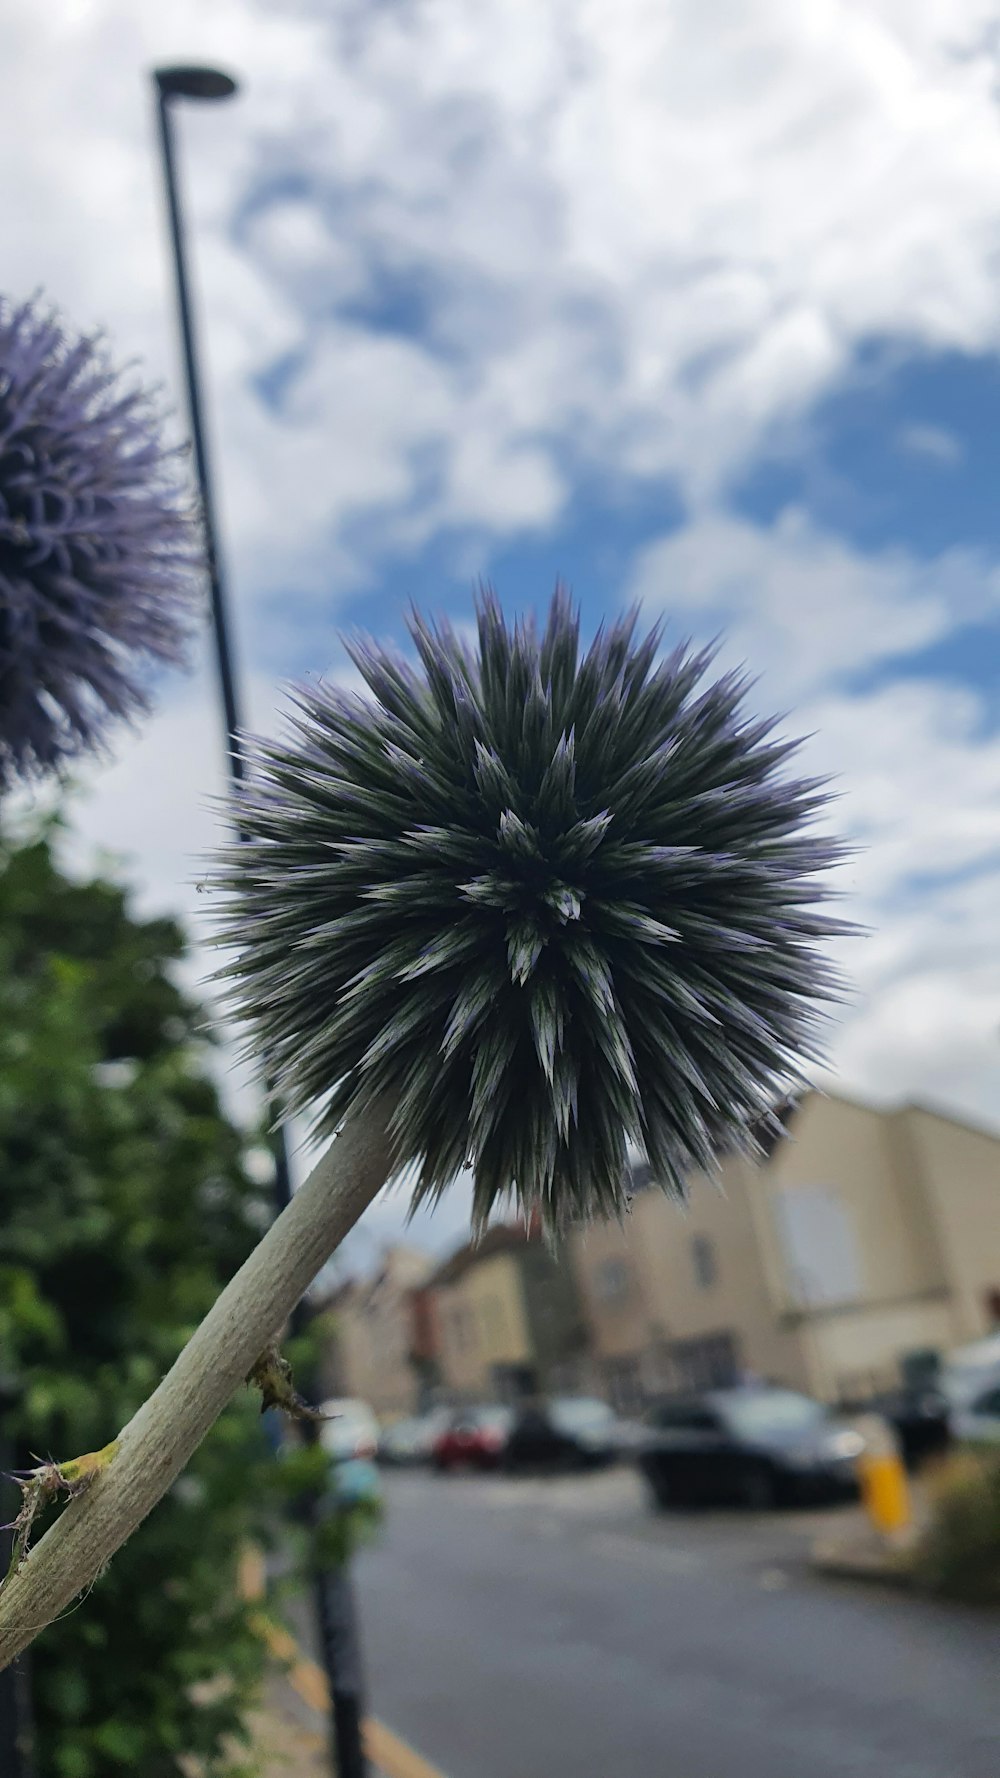 a close up of a plant near a street